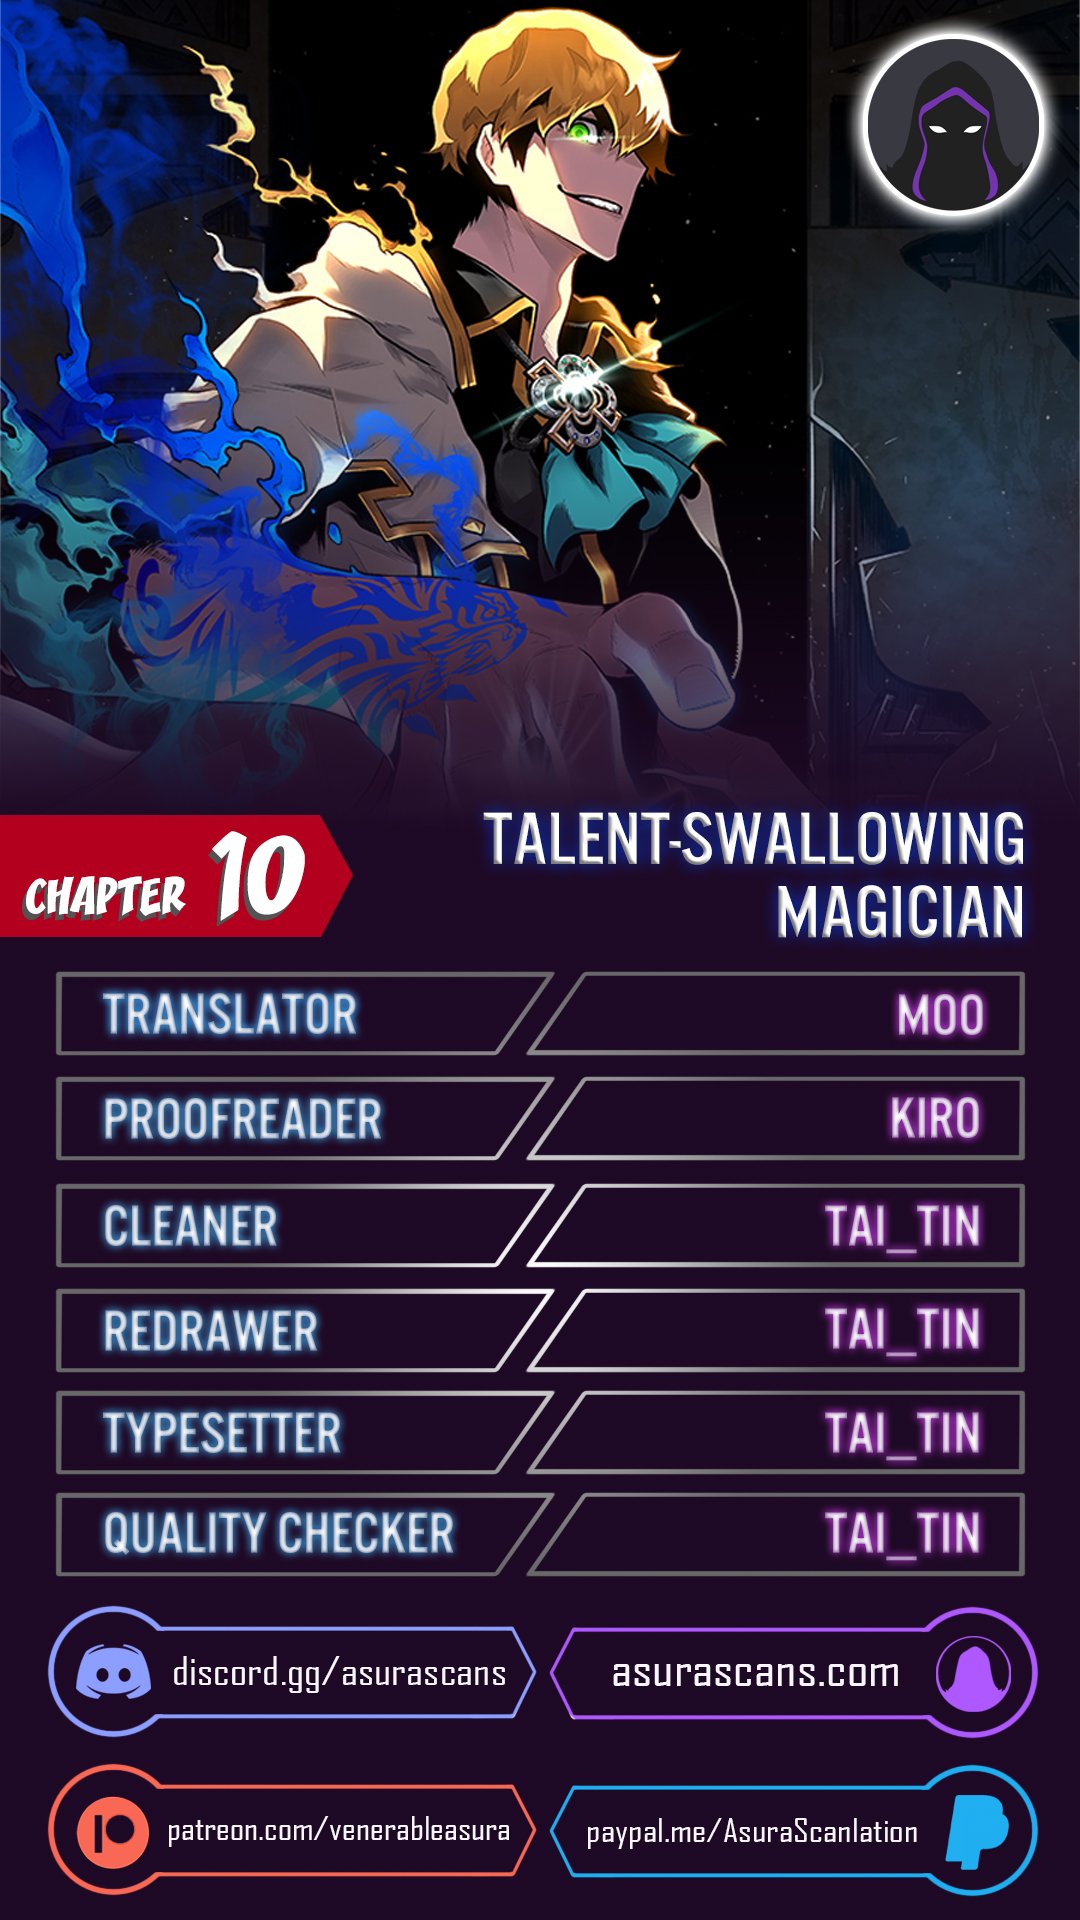 Talent-Swallowing Magician - Chapter 15408 - Image 1